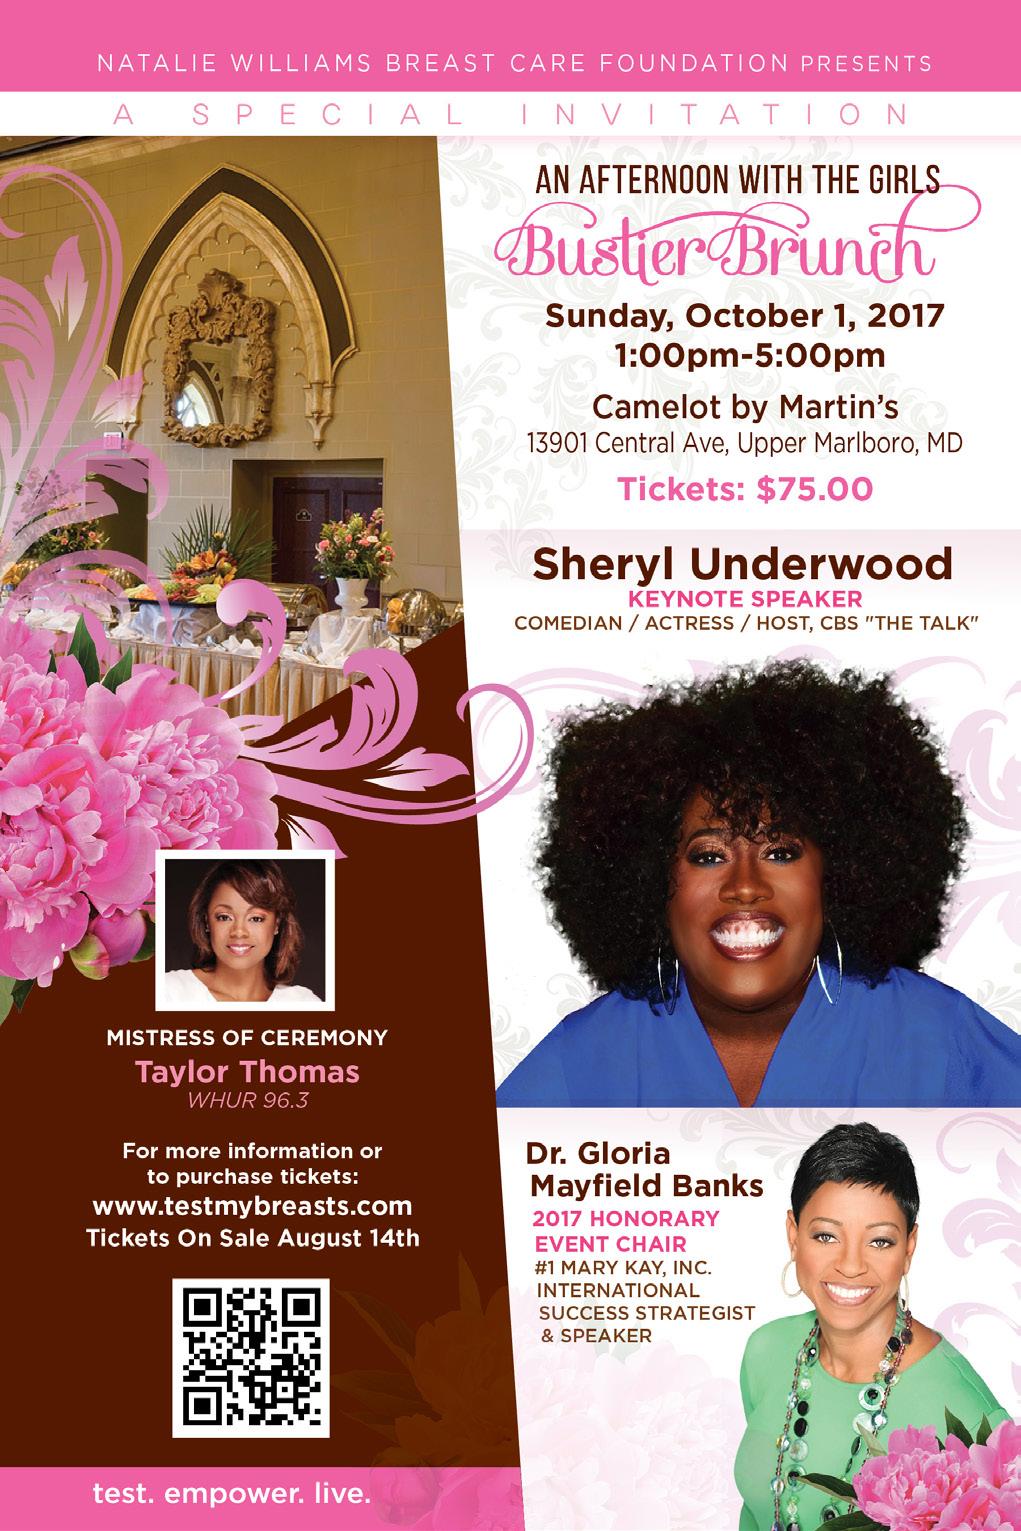 Dear Potential Supporter: On behalf of the Natalie Williams Breast Care Foundation (NWBCF), I am writing to you to request your financial support for the 2017 Bustier Brunch - An Afternoon with the